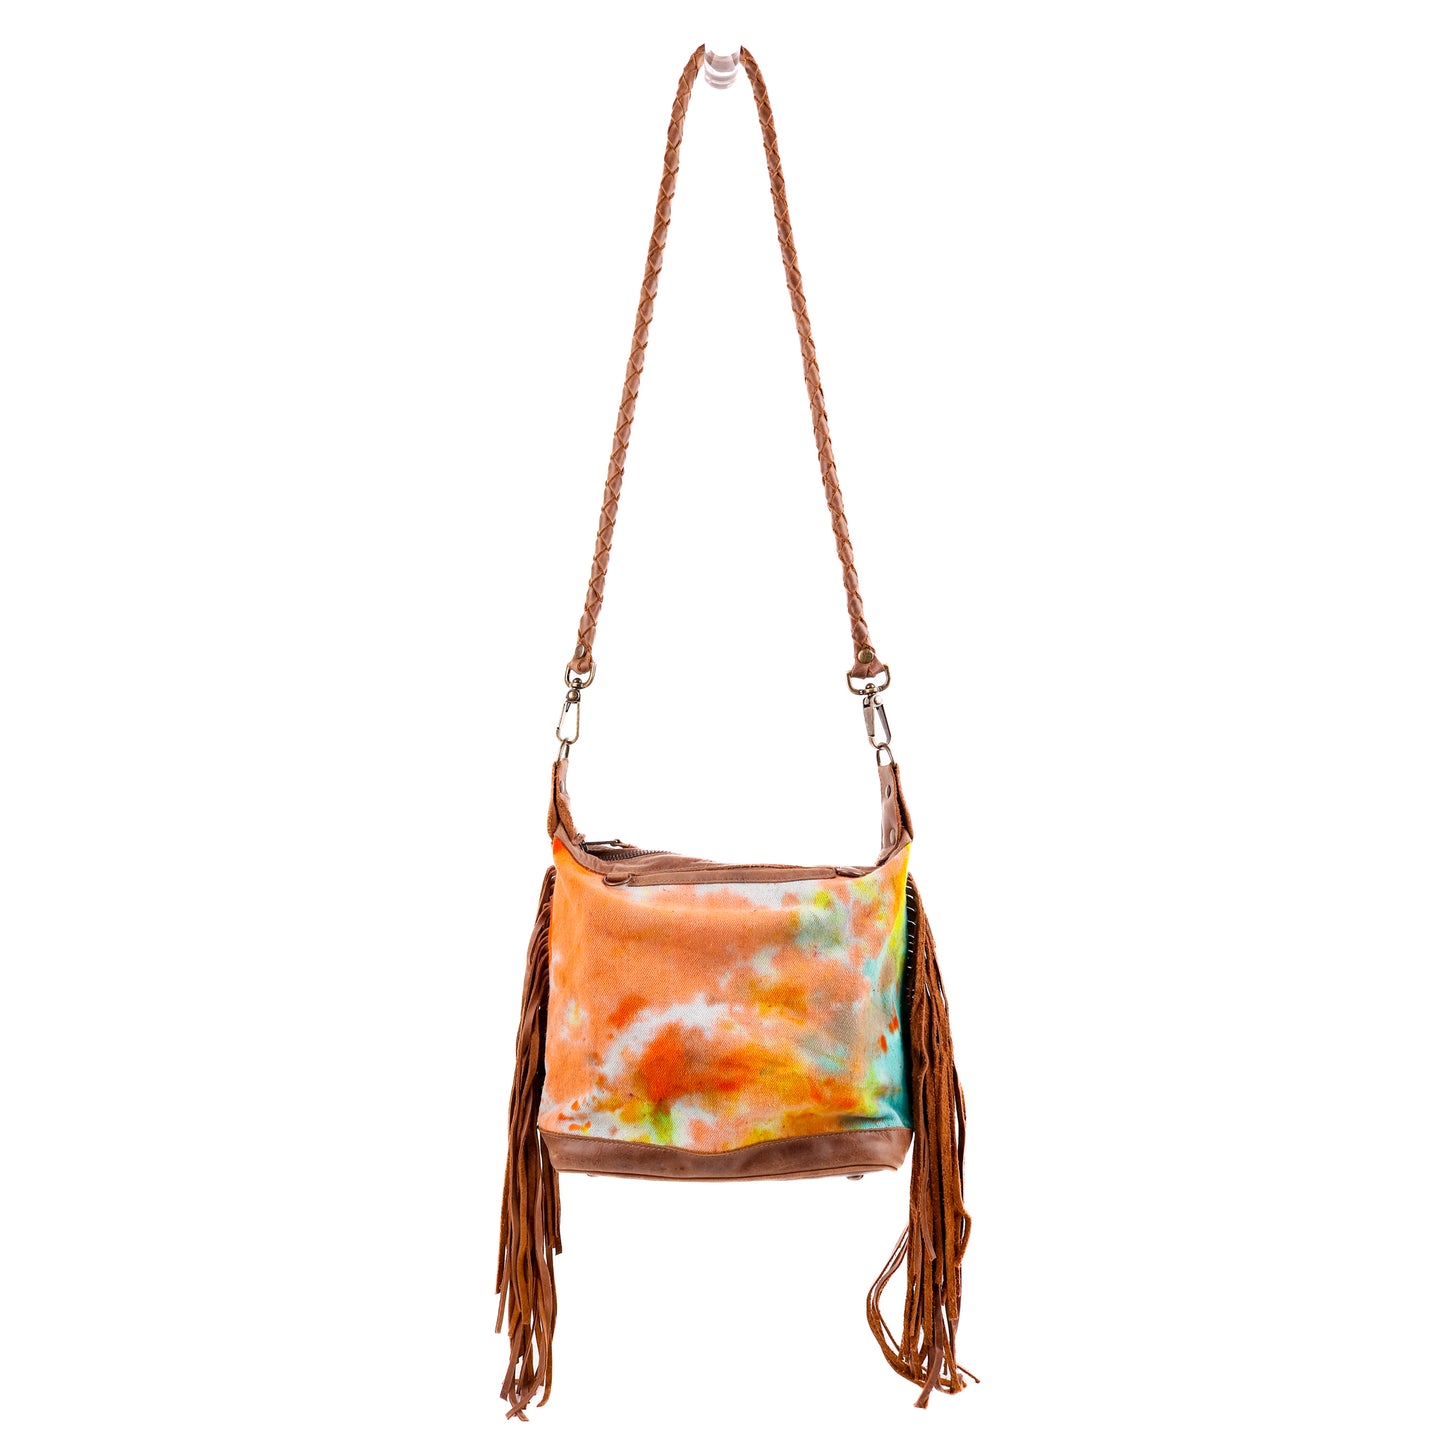 BEATRIZ MINI CONVERTIBLE DAY BAG WITH FRINGE - UPCYCLED DENIM - TIE DYE - CAOBA - NO. 10012